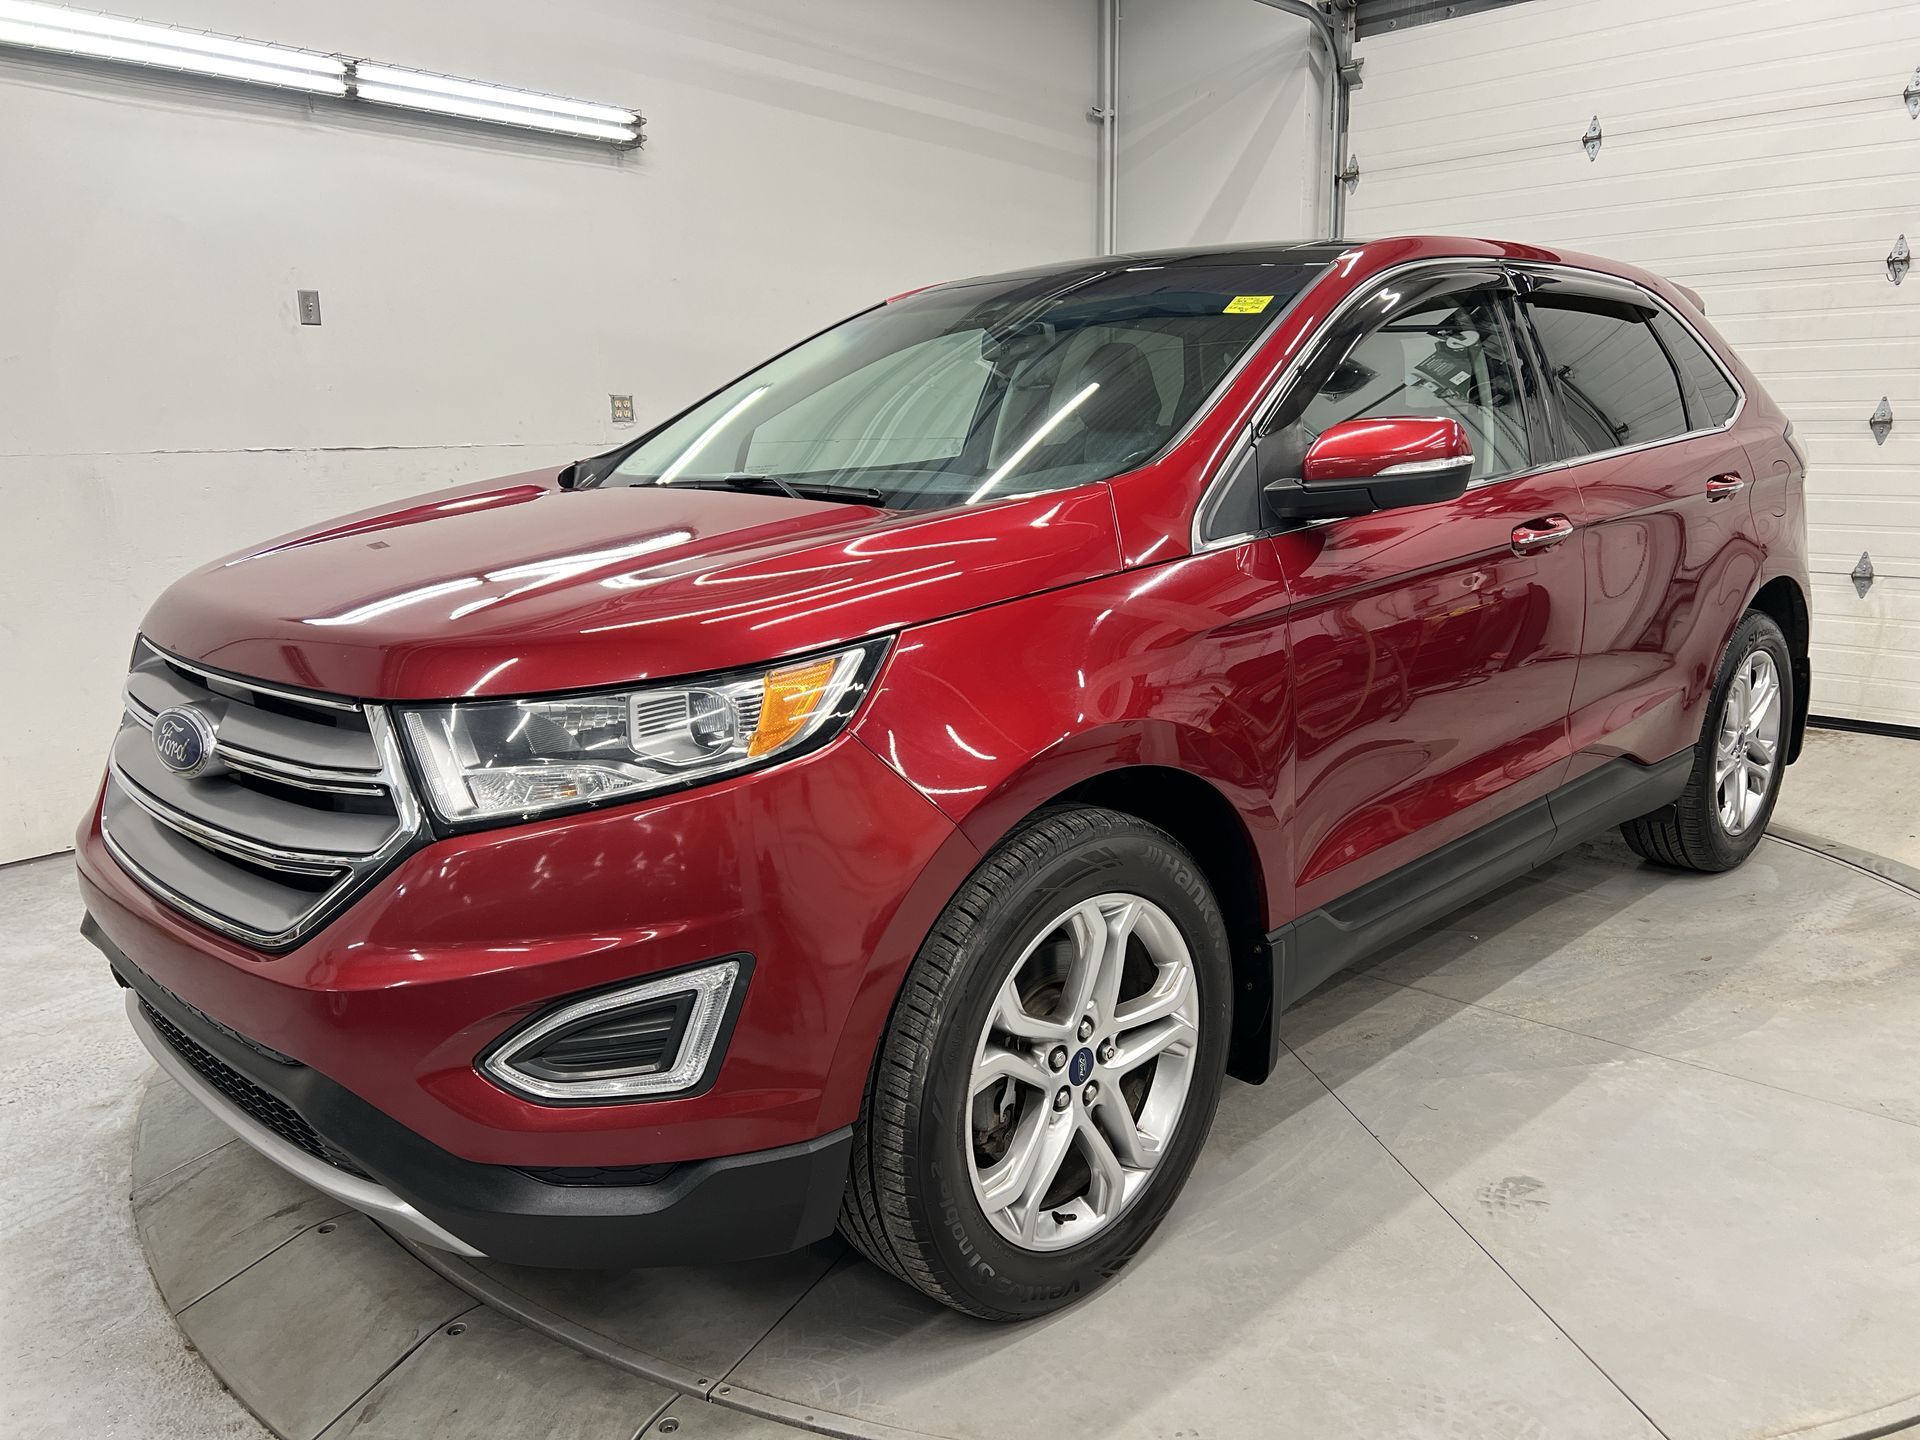 2018 Ford Edge TITANIUM AWD | PANO ROOF | COOLED LEATHER | NAV